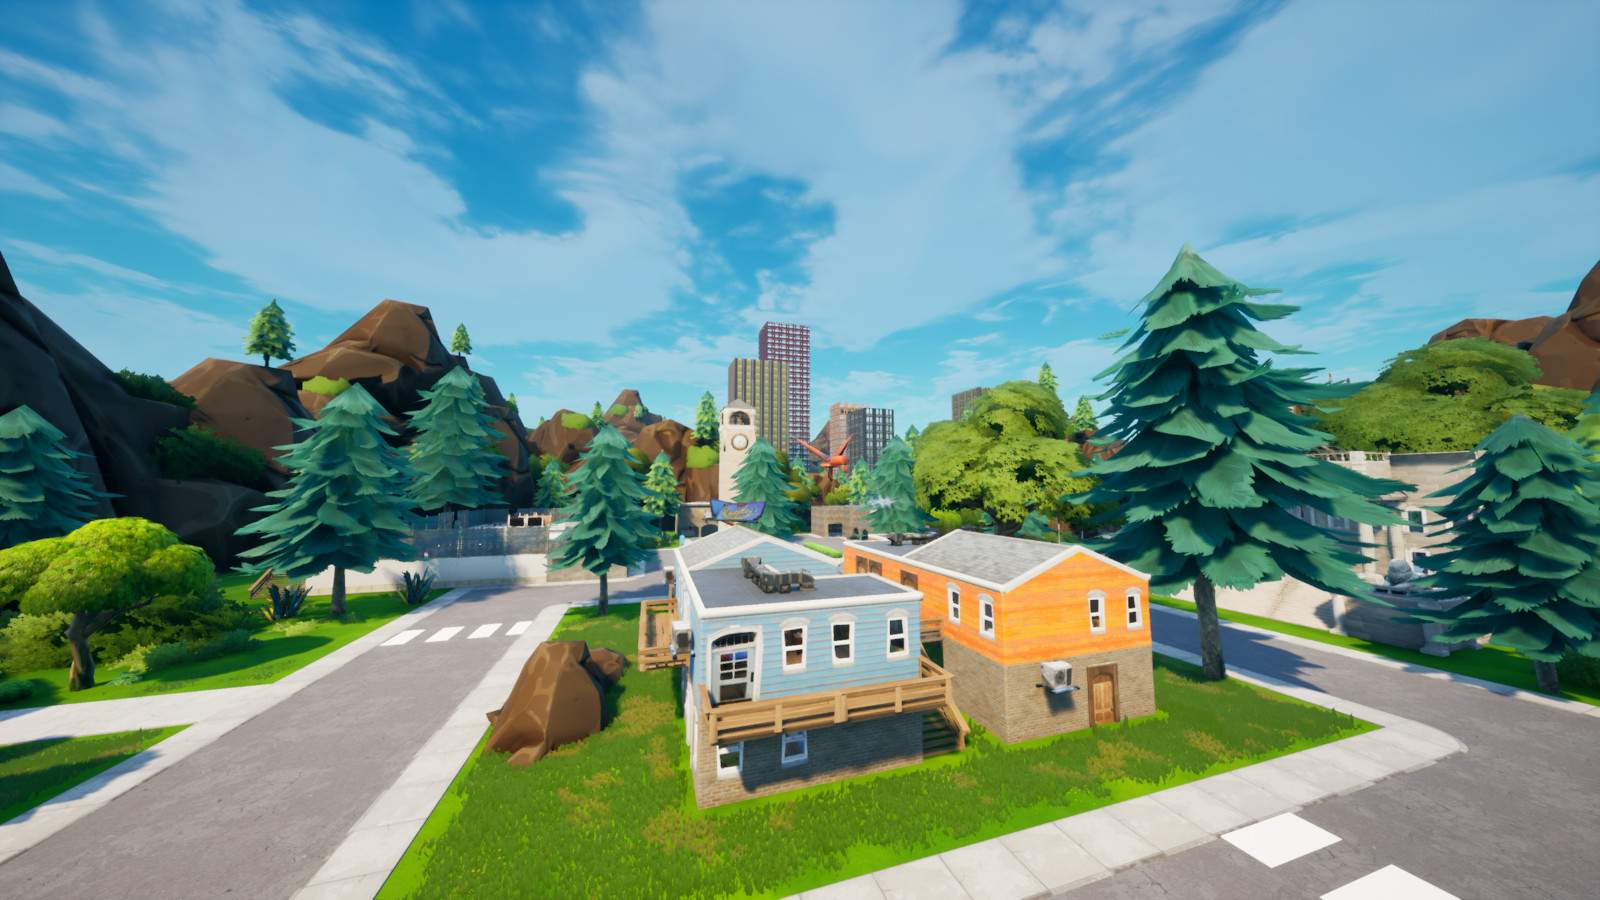 Fortnite Roleplay Map Codes Fortnite Creative Codes Dropnite Com - codes for downtown rp roblox